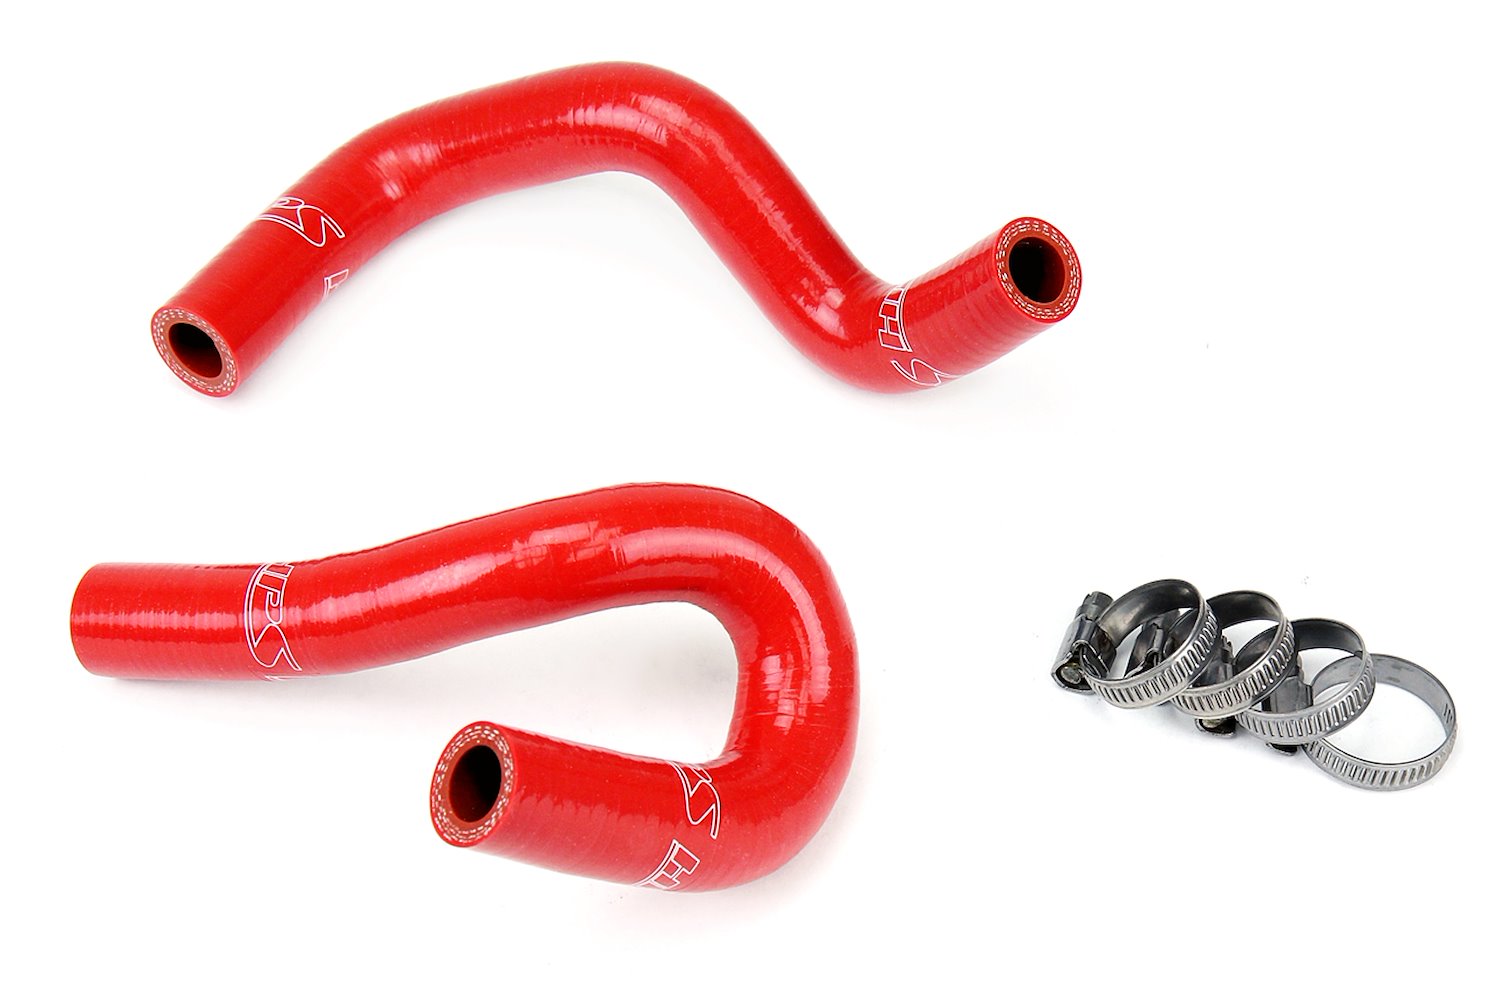 57-1309-RED Heater Hose Kit, High-Temp 3-Ply Reinforced Silicone, Replace OEM Rubber Heater Coolant Hoses